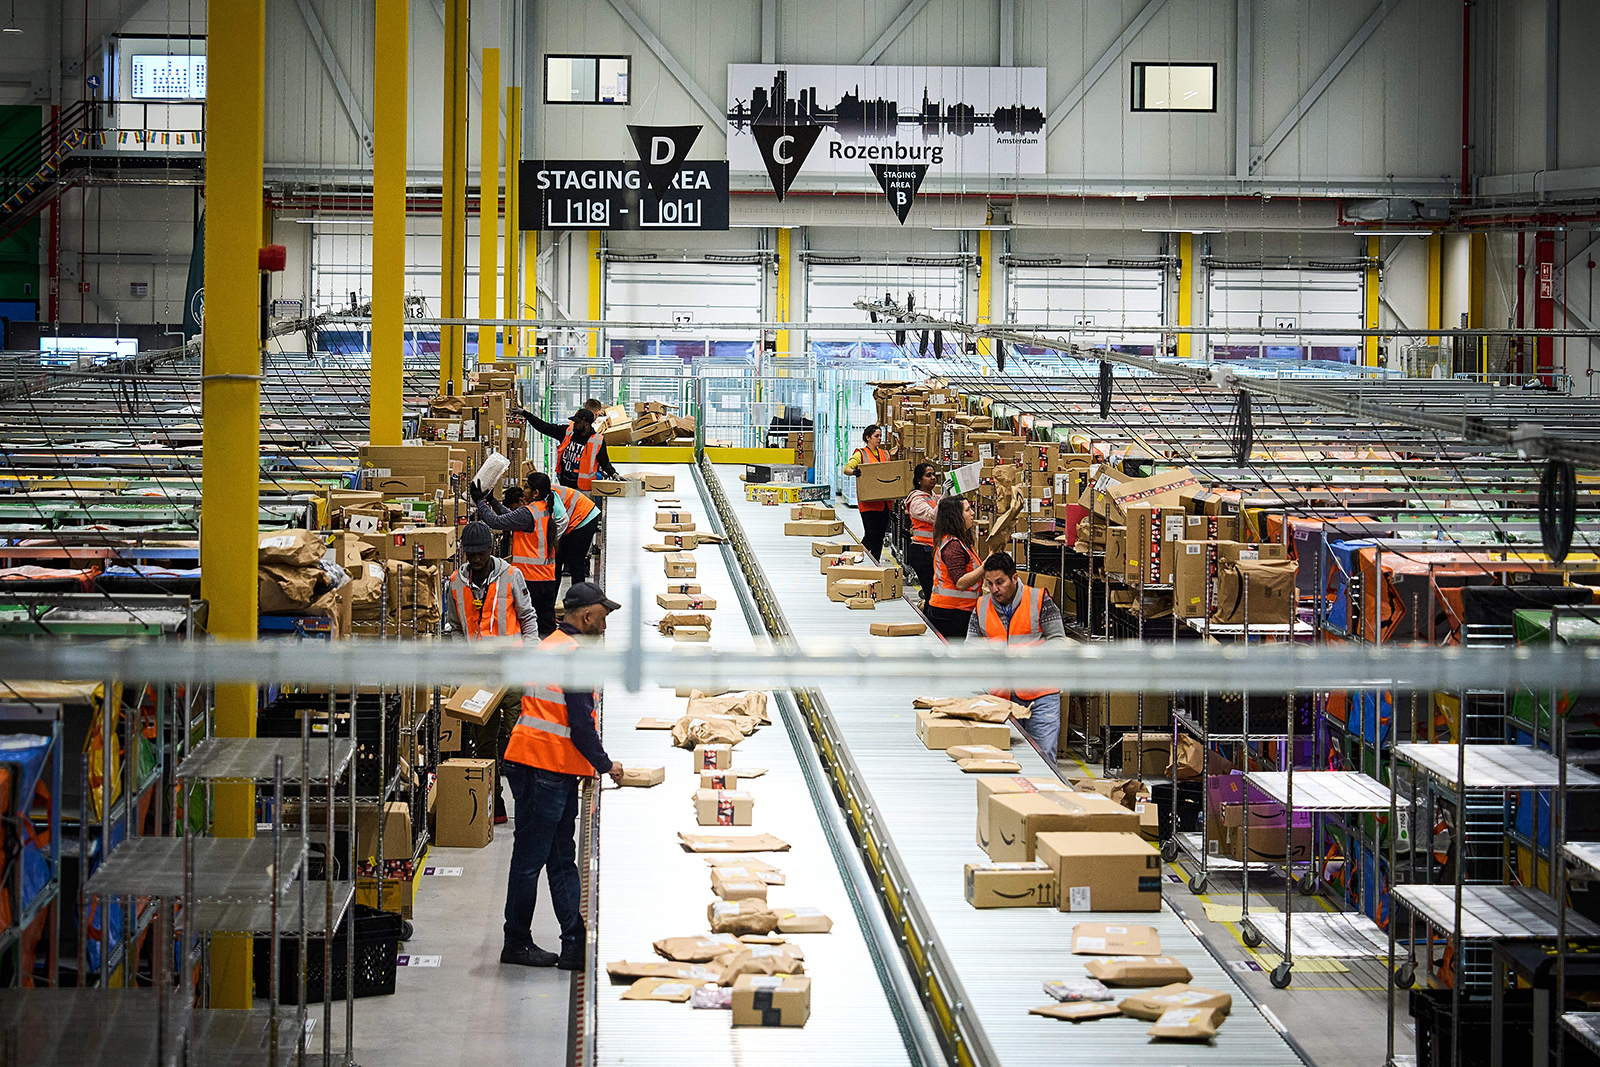 Employees work at an Amazon delivery station in Rozenburg, Netherlands, on November 30, 2022.